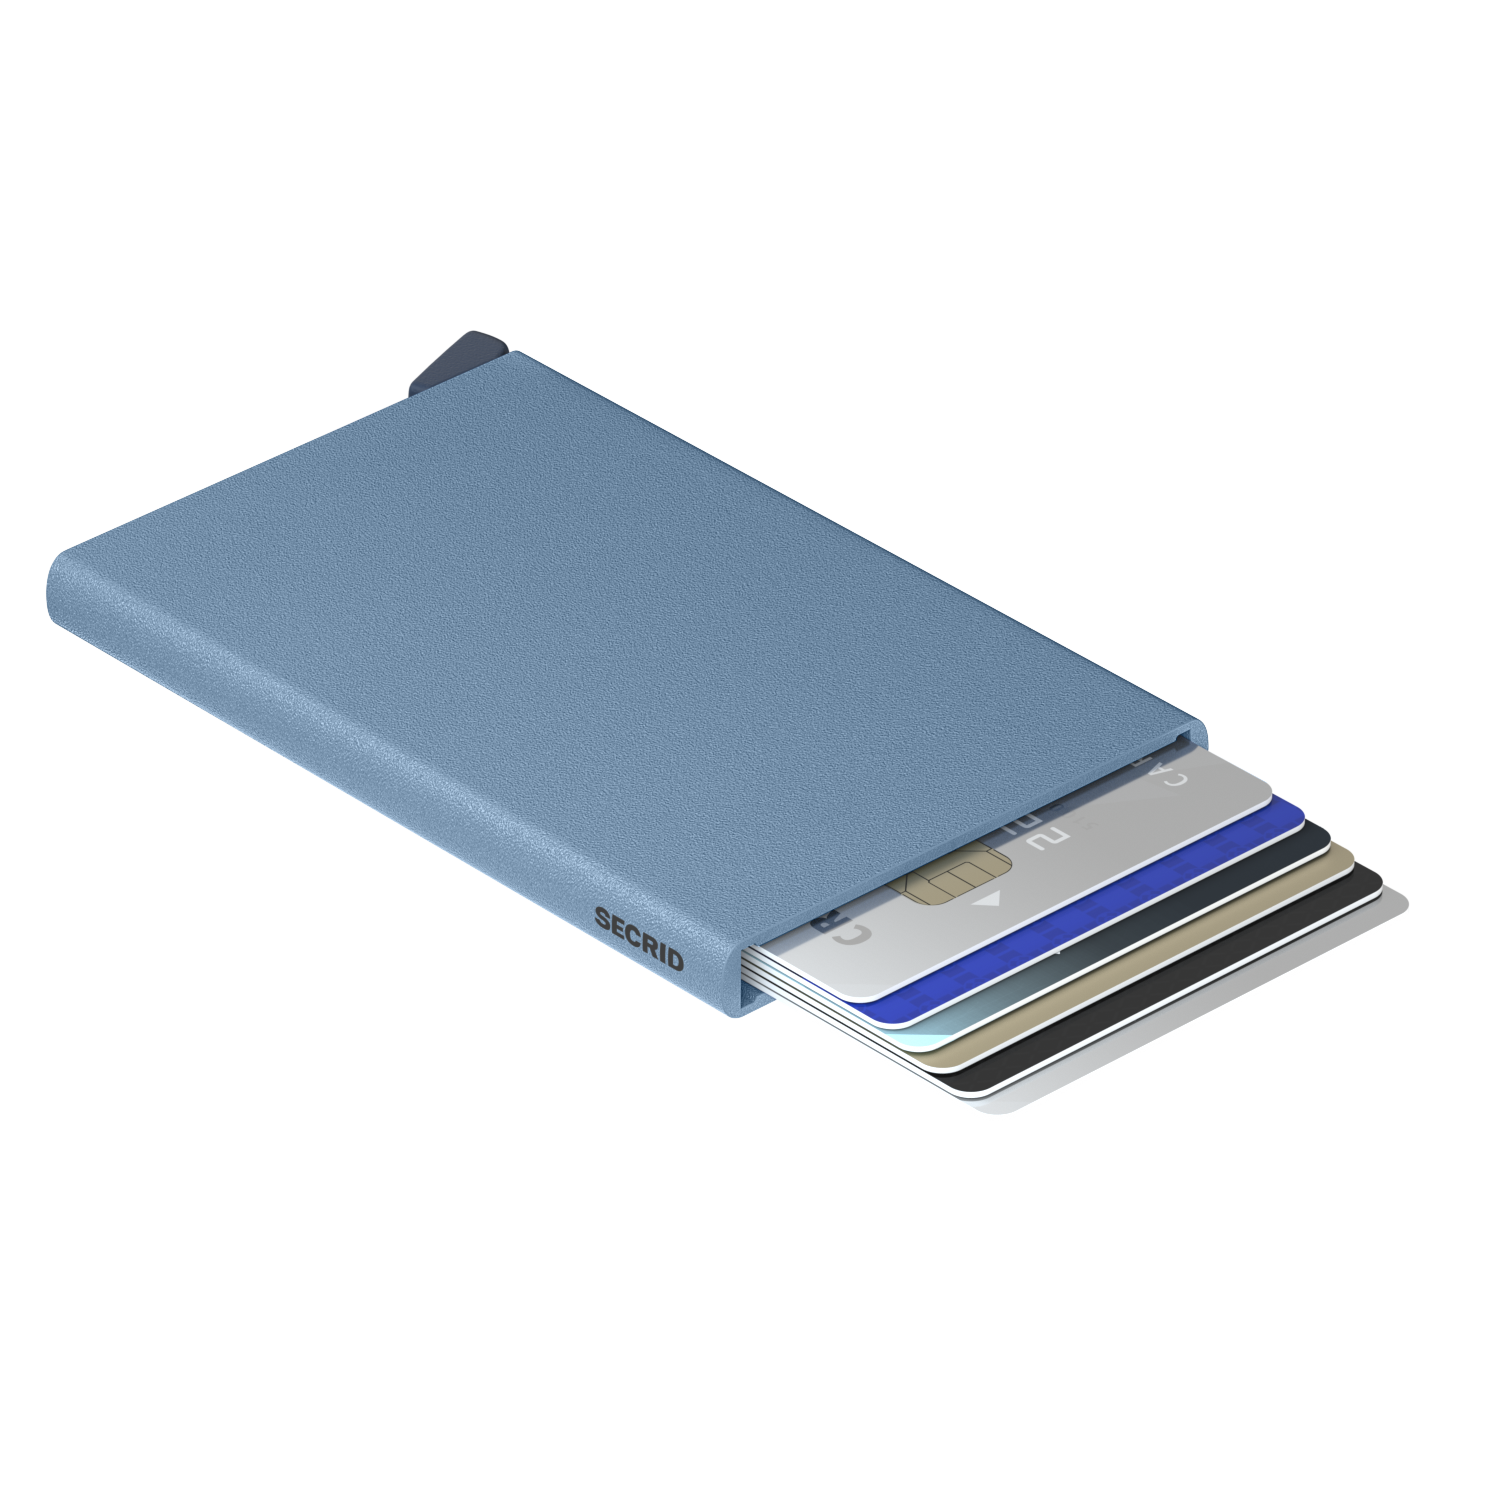 SECRID Sky Blue Card Protector Flat Cards Extended